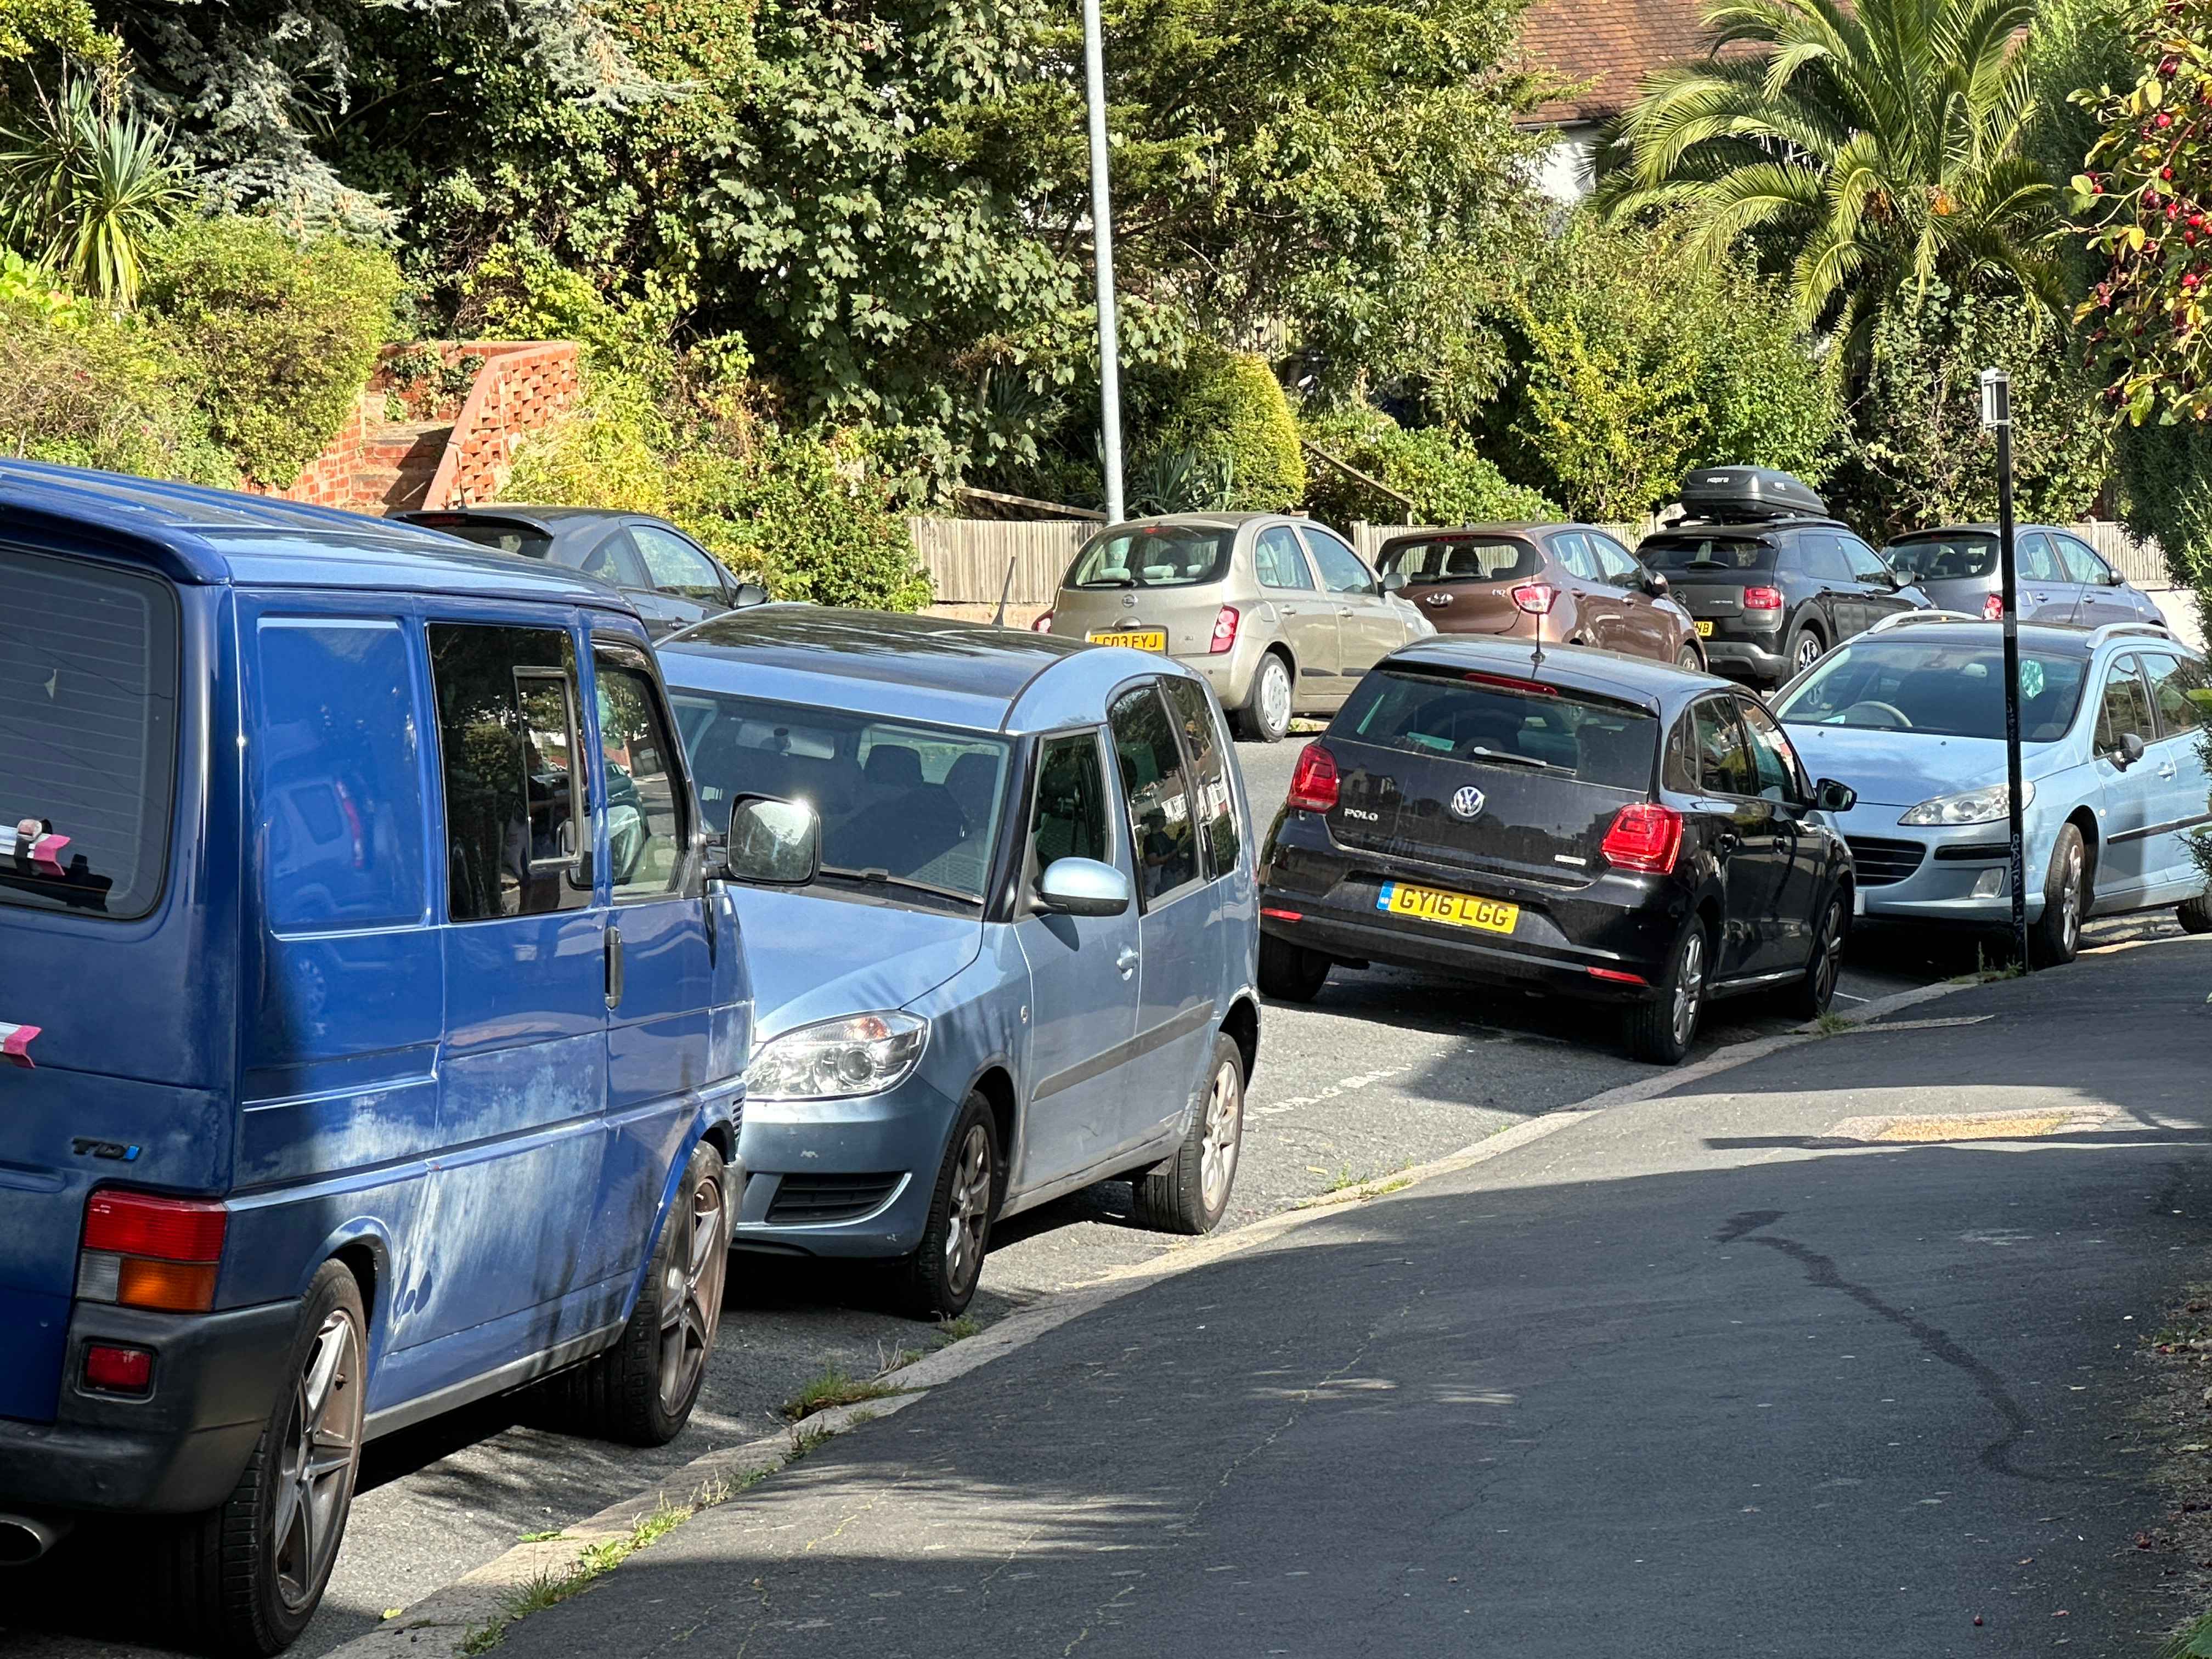 Photograph of GY02 KYW - a Blue Volkswagen Transporter camper van parked in Hollingdean by a non-resident. The twelfth of eighteen photographs supplied by the residents of Hollingdean.